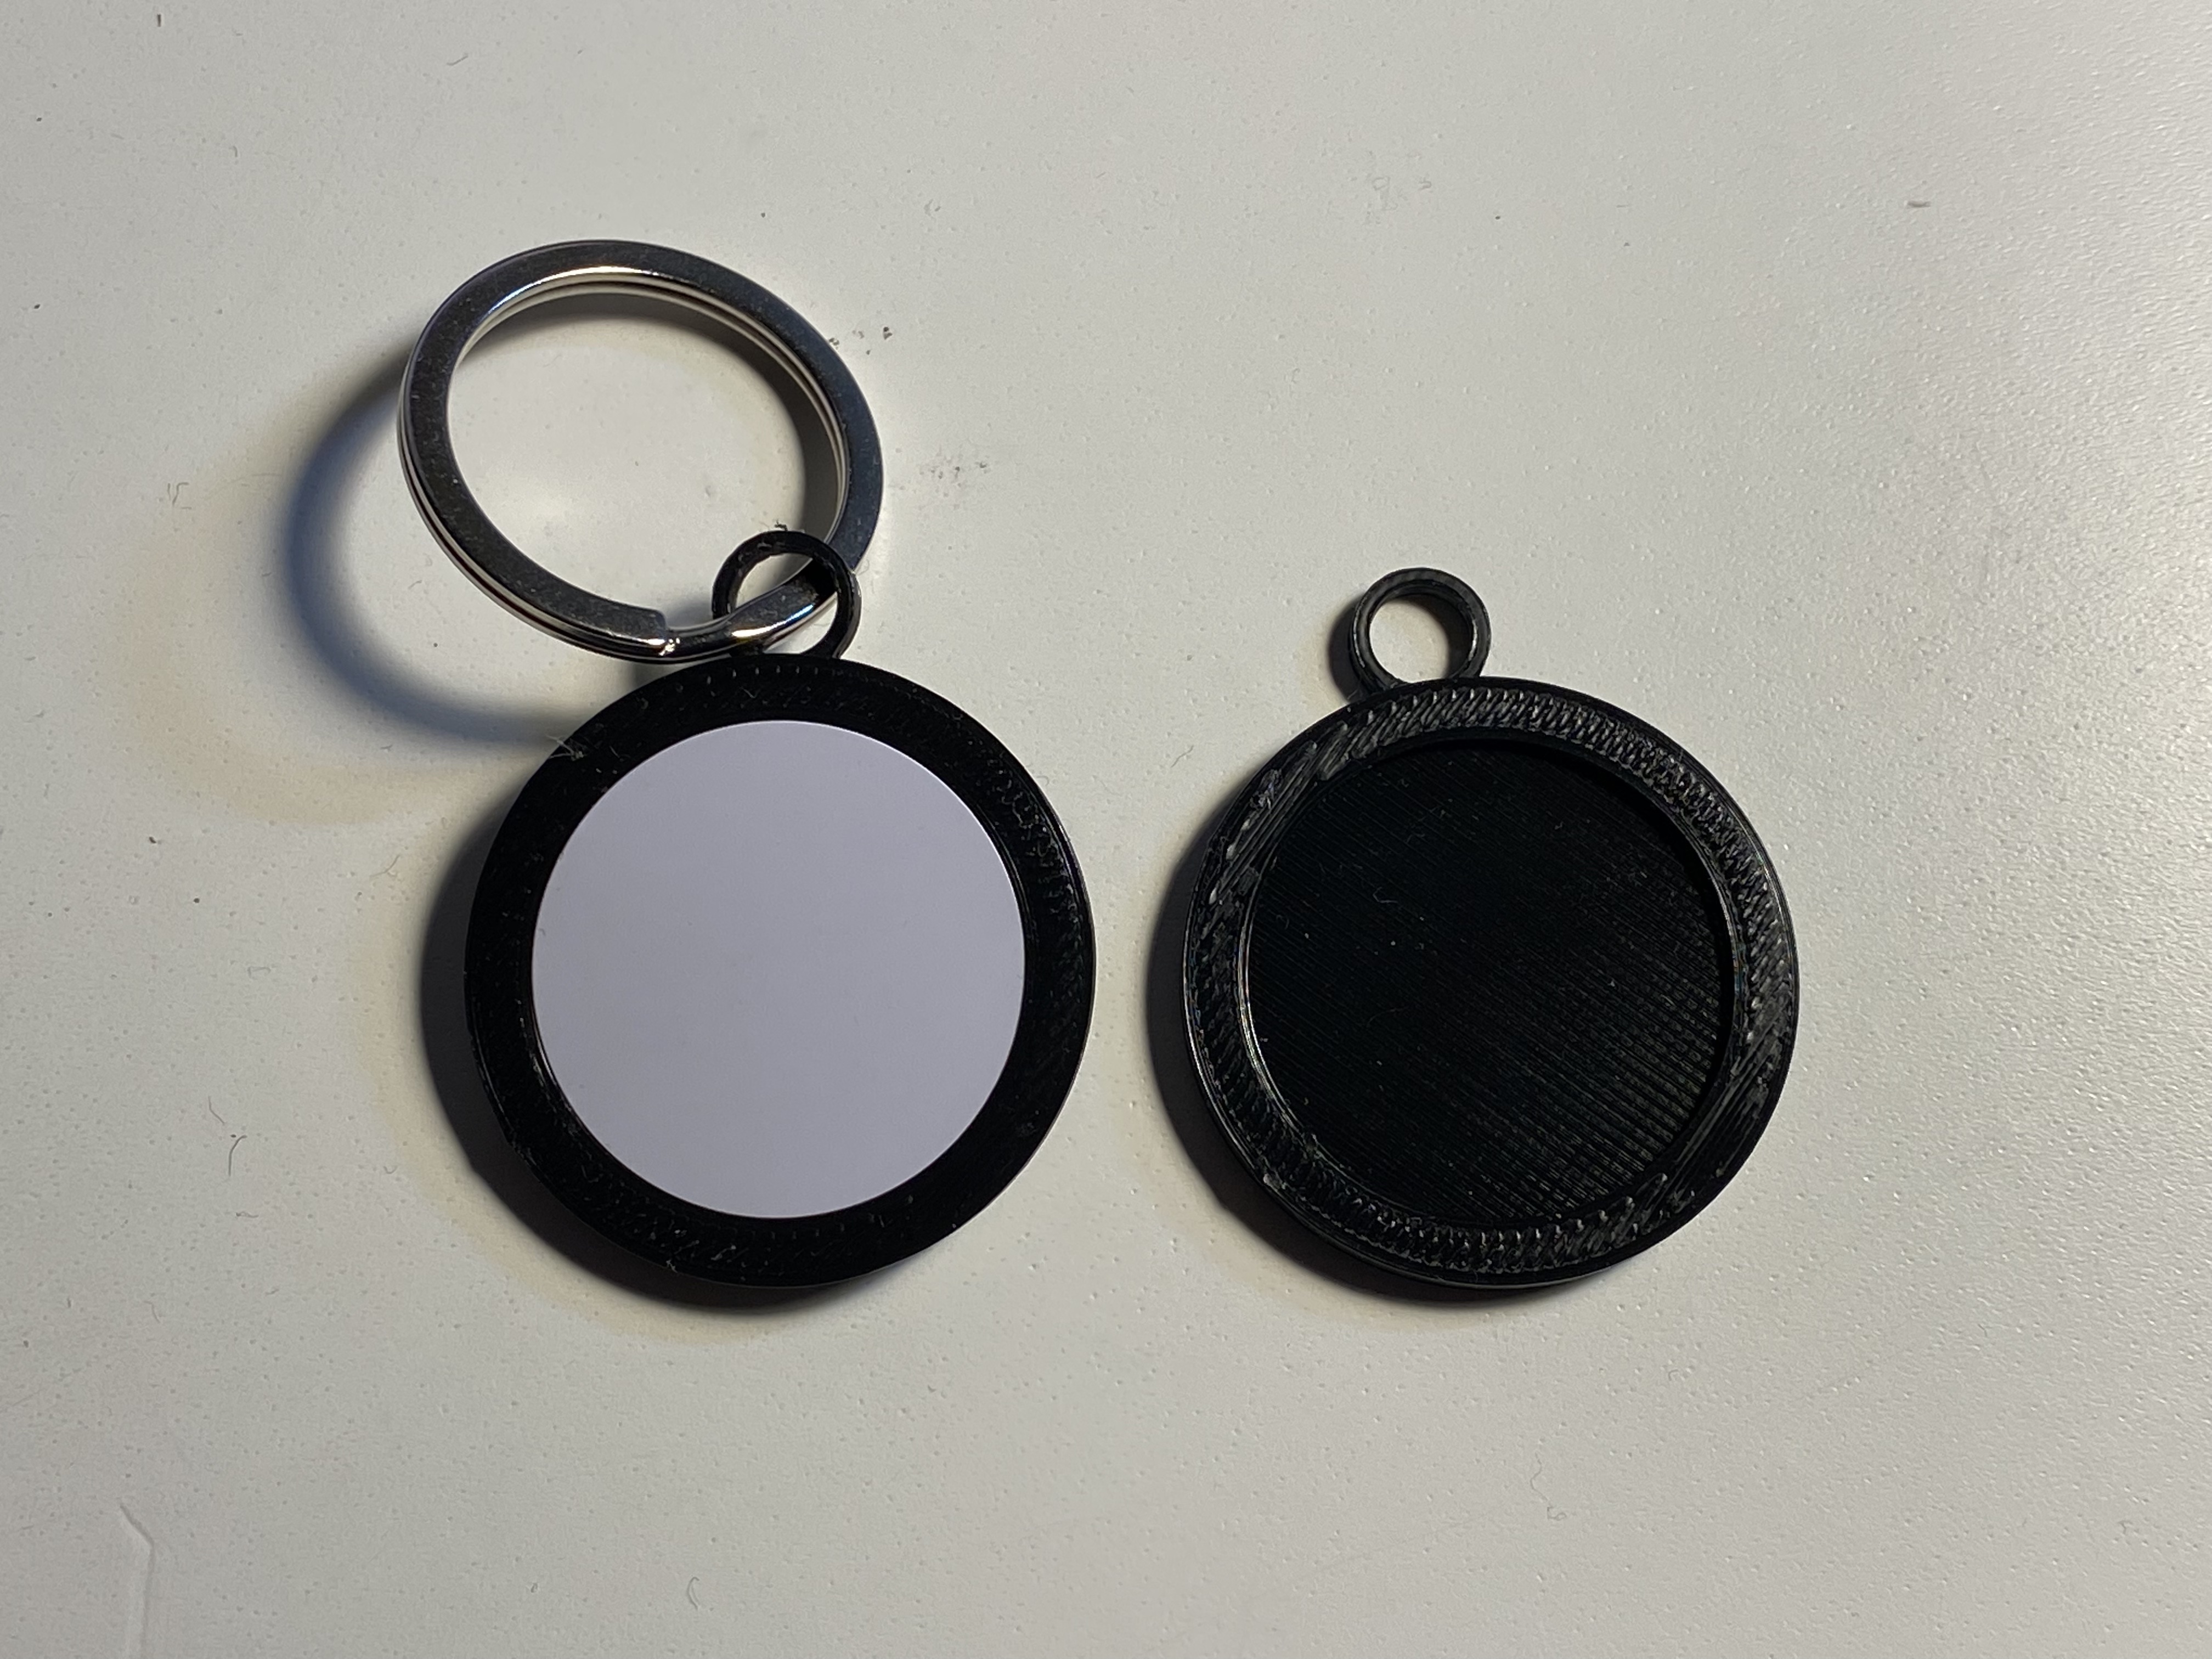 NFC Tag keychain holder for NTAG215 25mm tokens